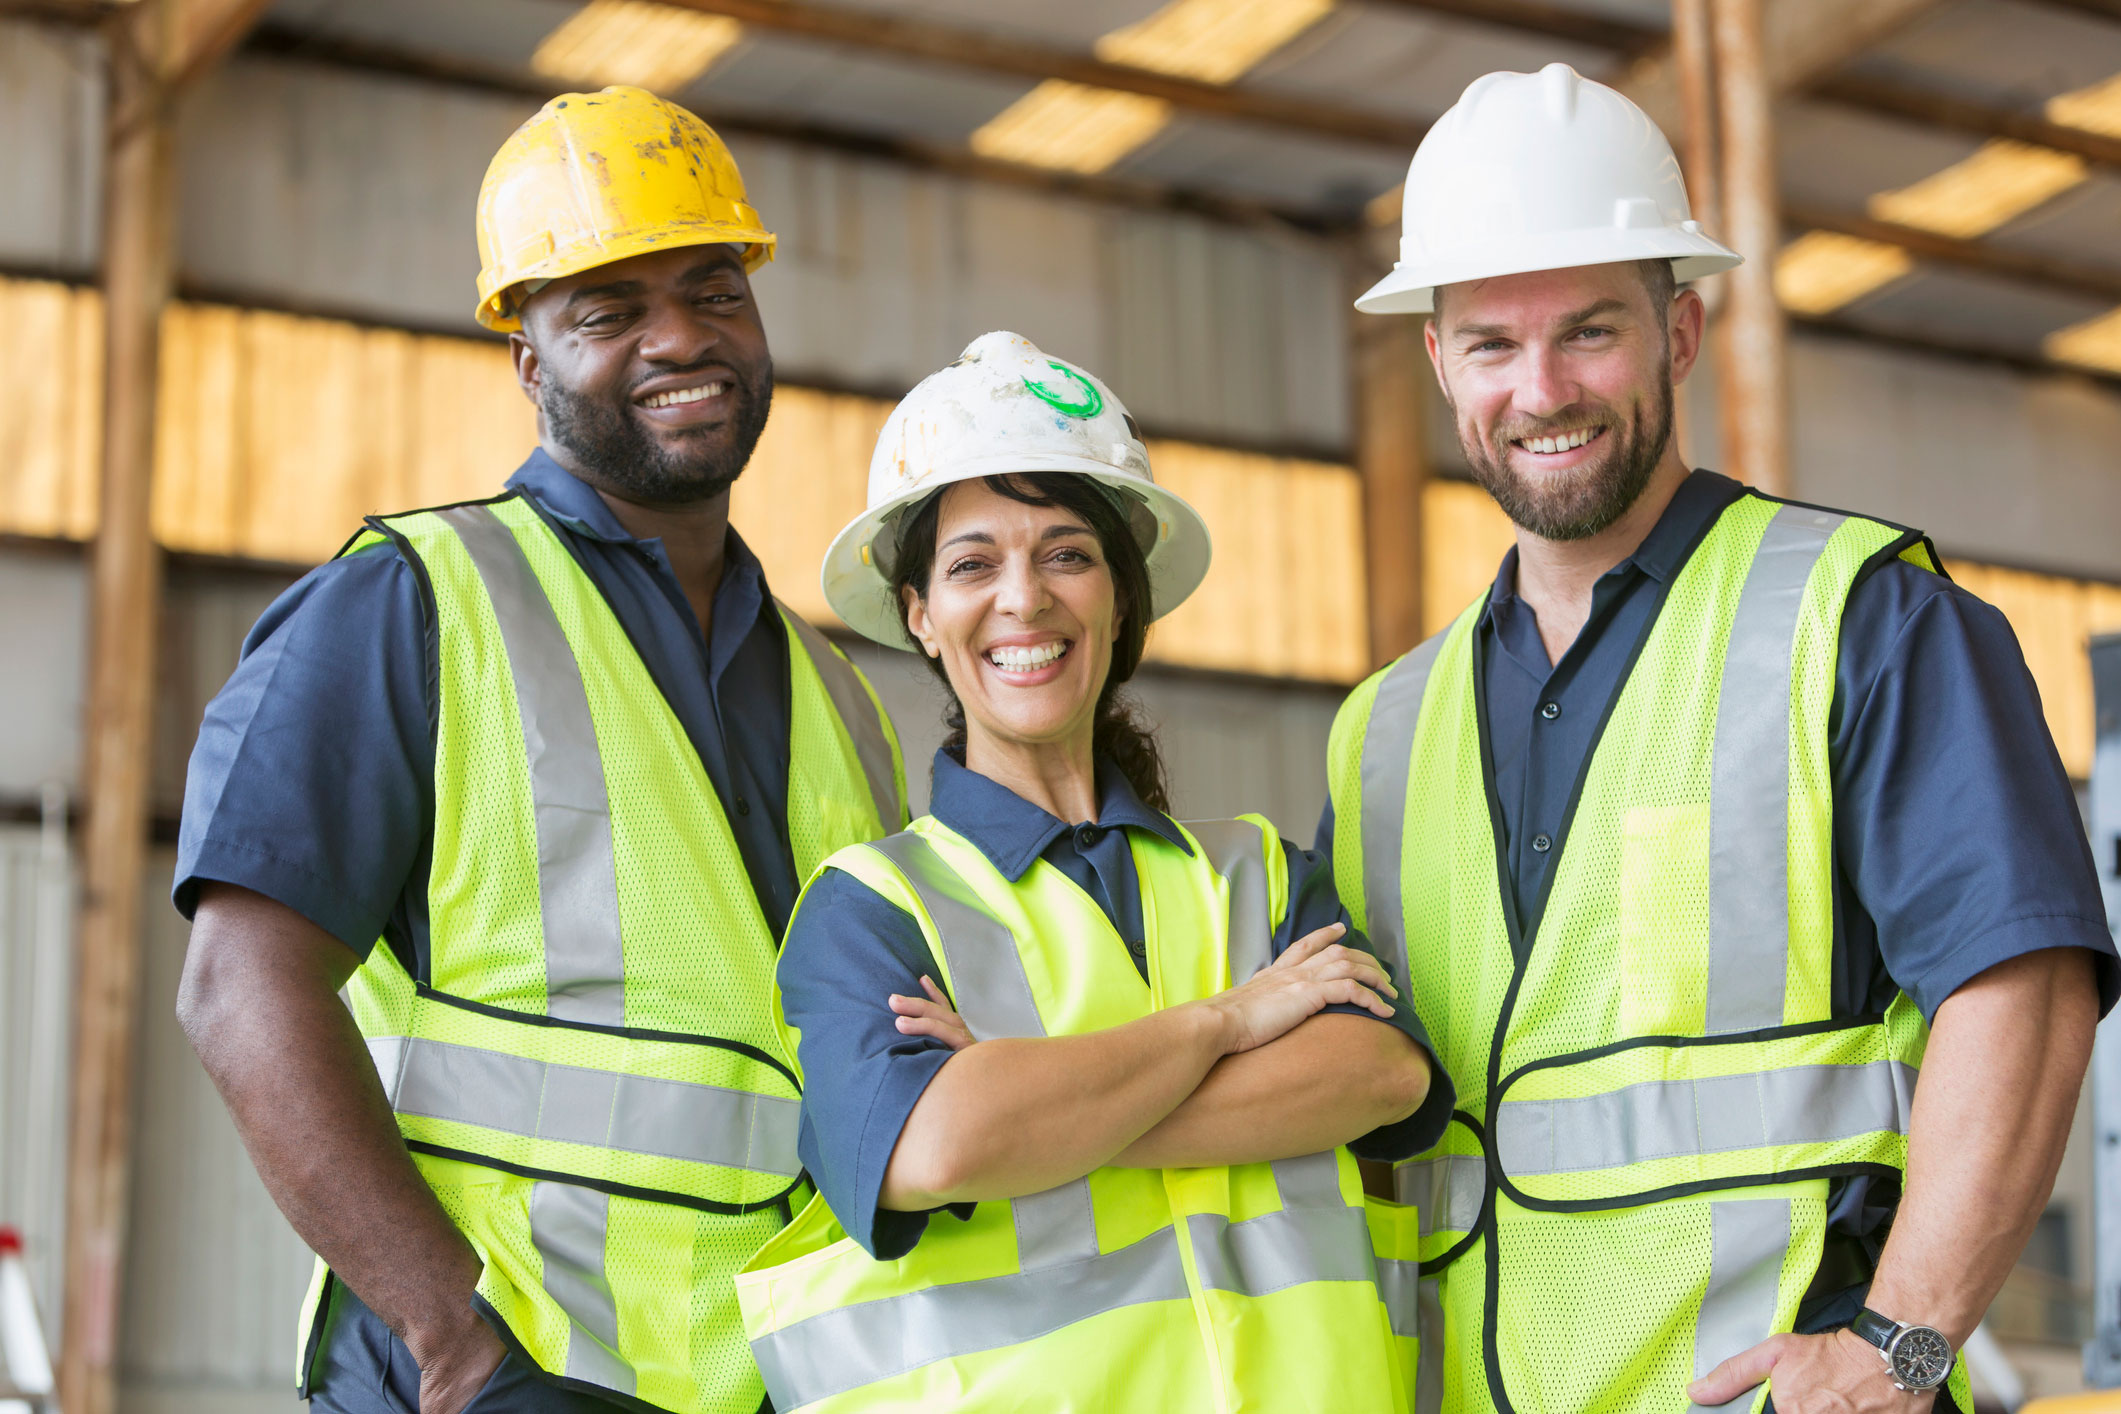 Group of construction workers smiling together